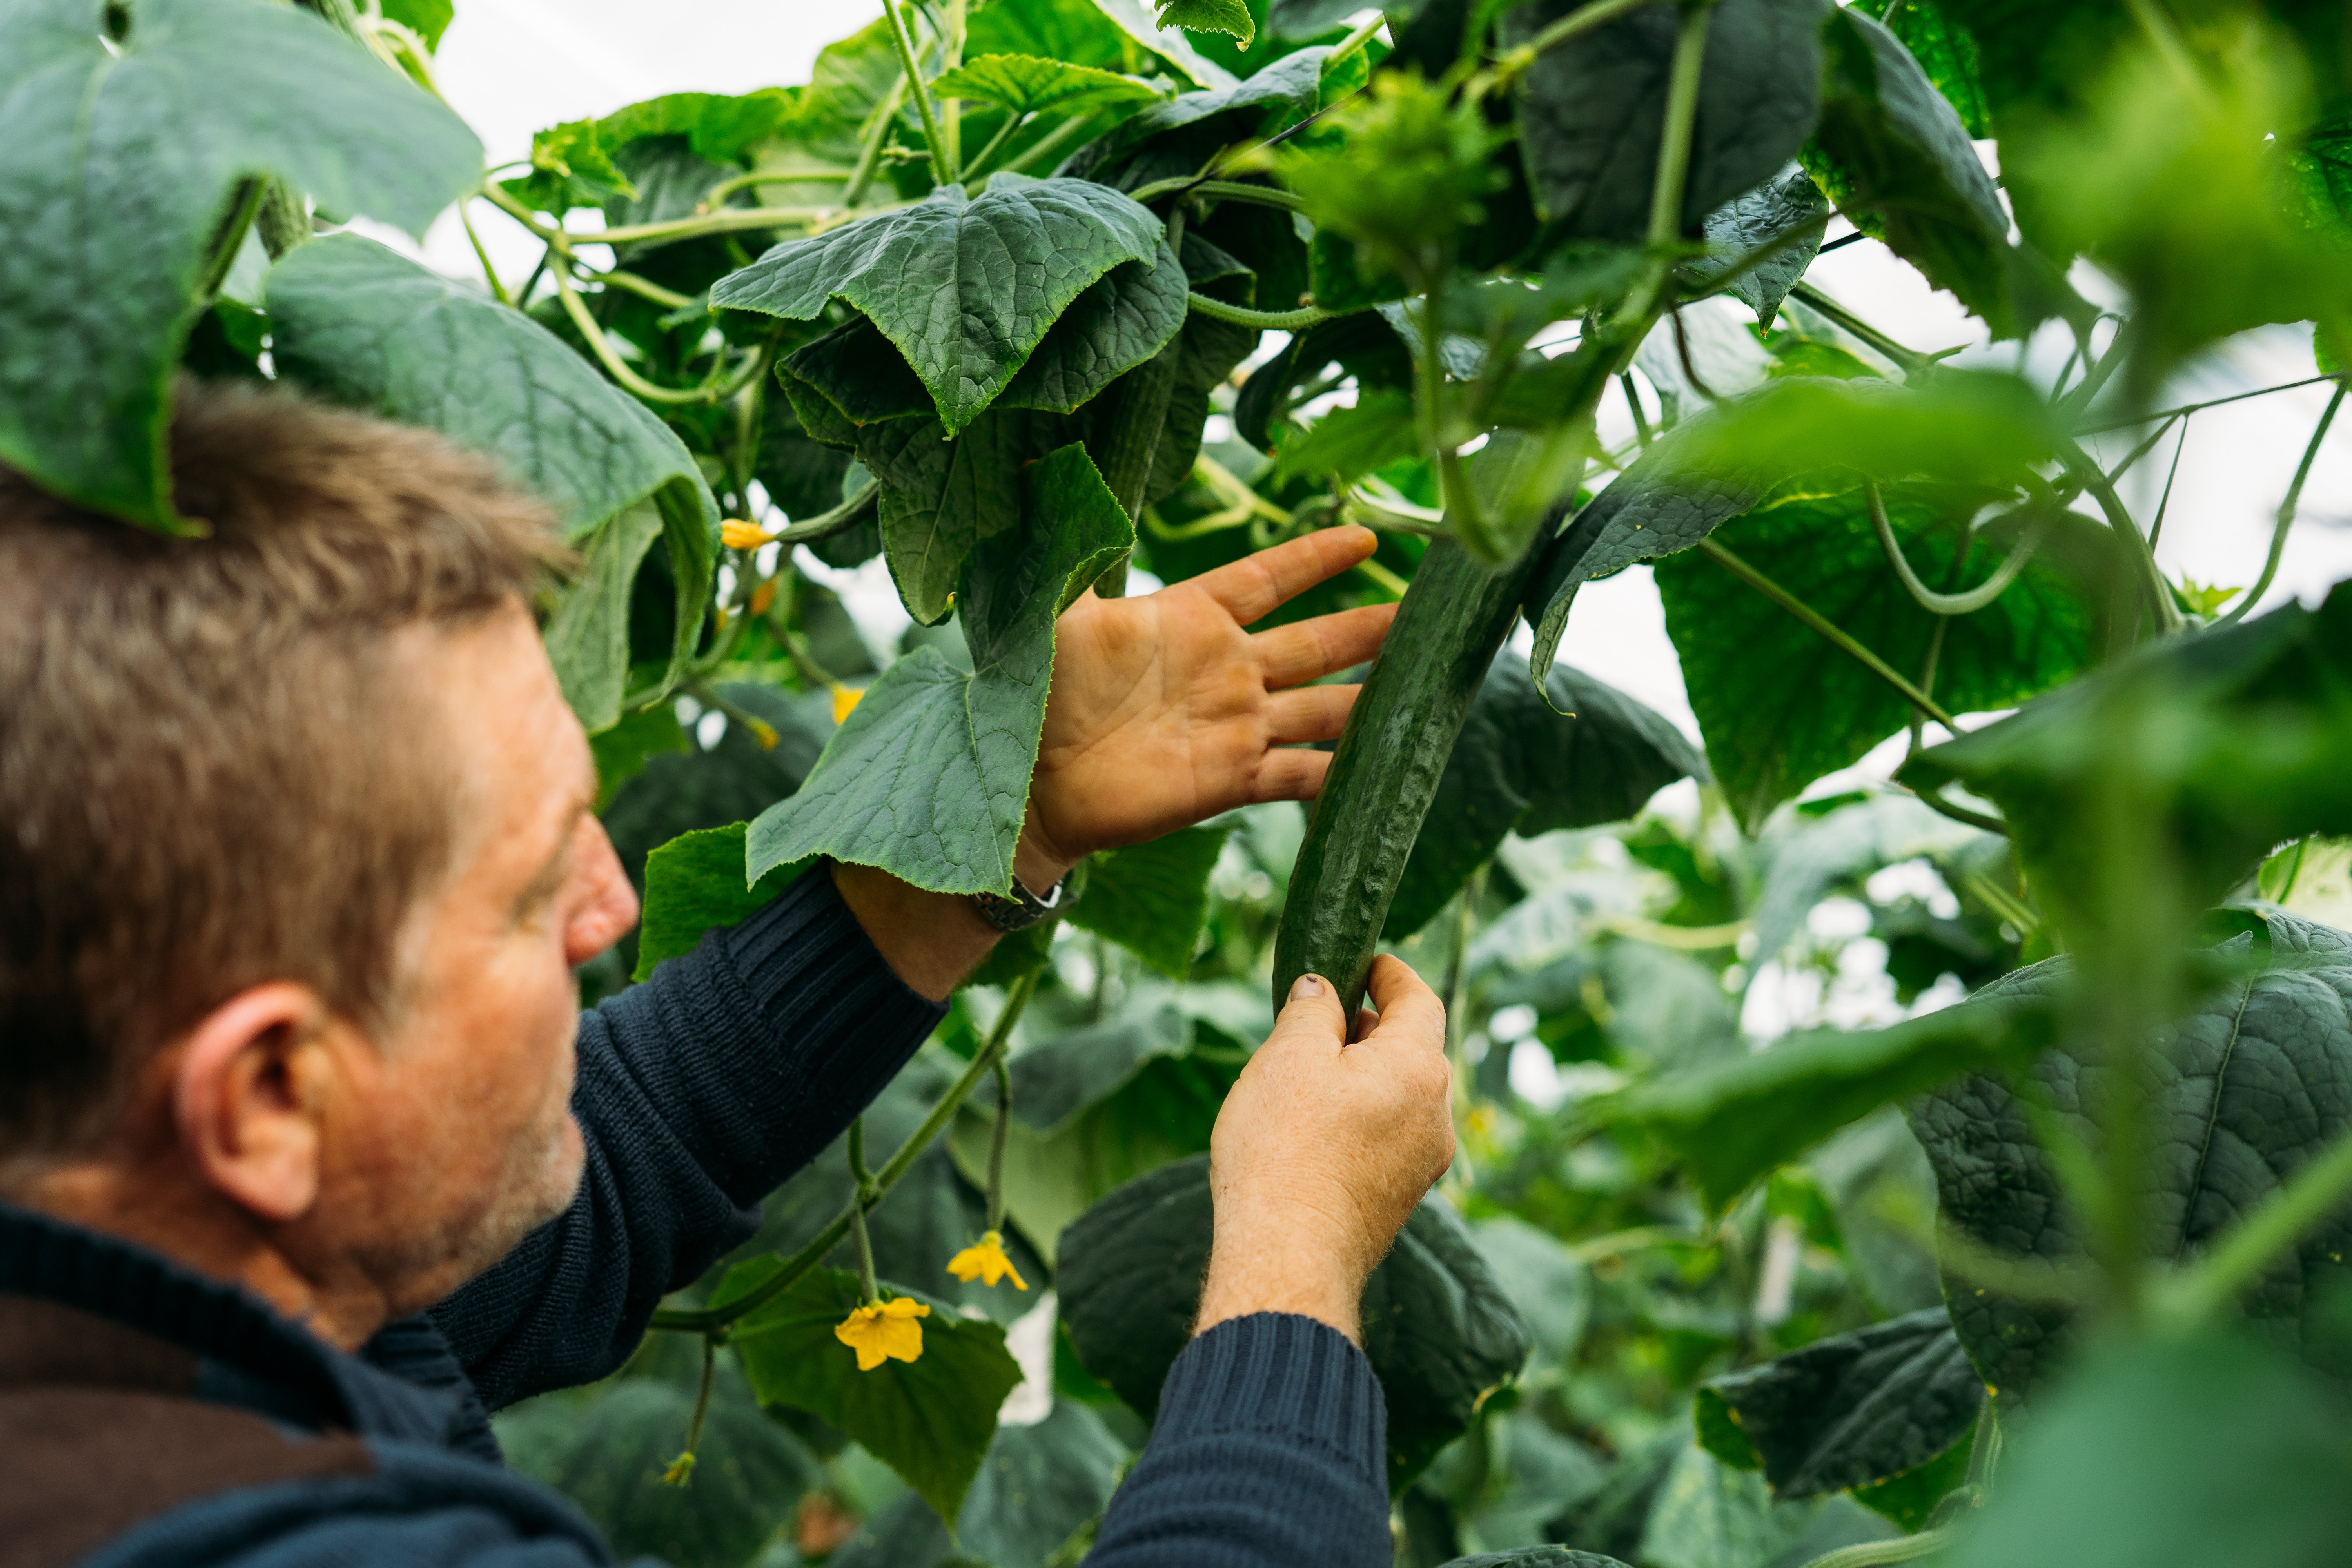 Grower inspecting a hydroponically grown cucumber on the vine